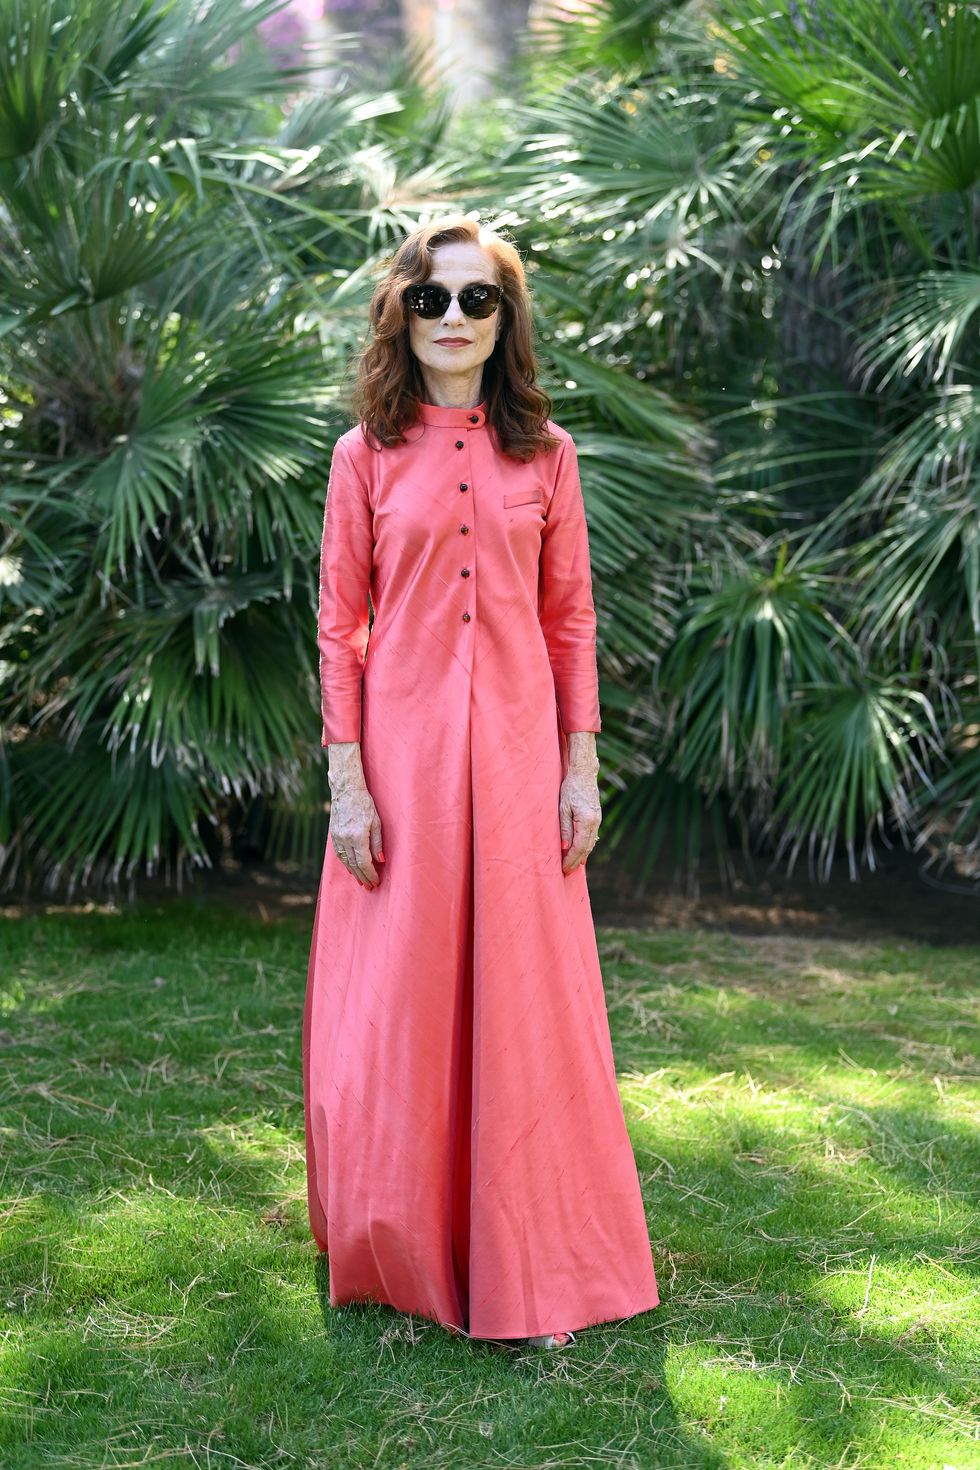 santa margherita di pula, italy   july 25 isabelle huppert attends  filming italy sardegna festival 2020 day 4 press conference at forte village resort on july 25, 2020 in santa margherita di pula, italy photo by daniele venturellidaniele venturelligetty images